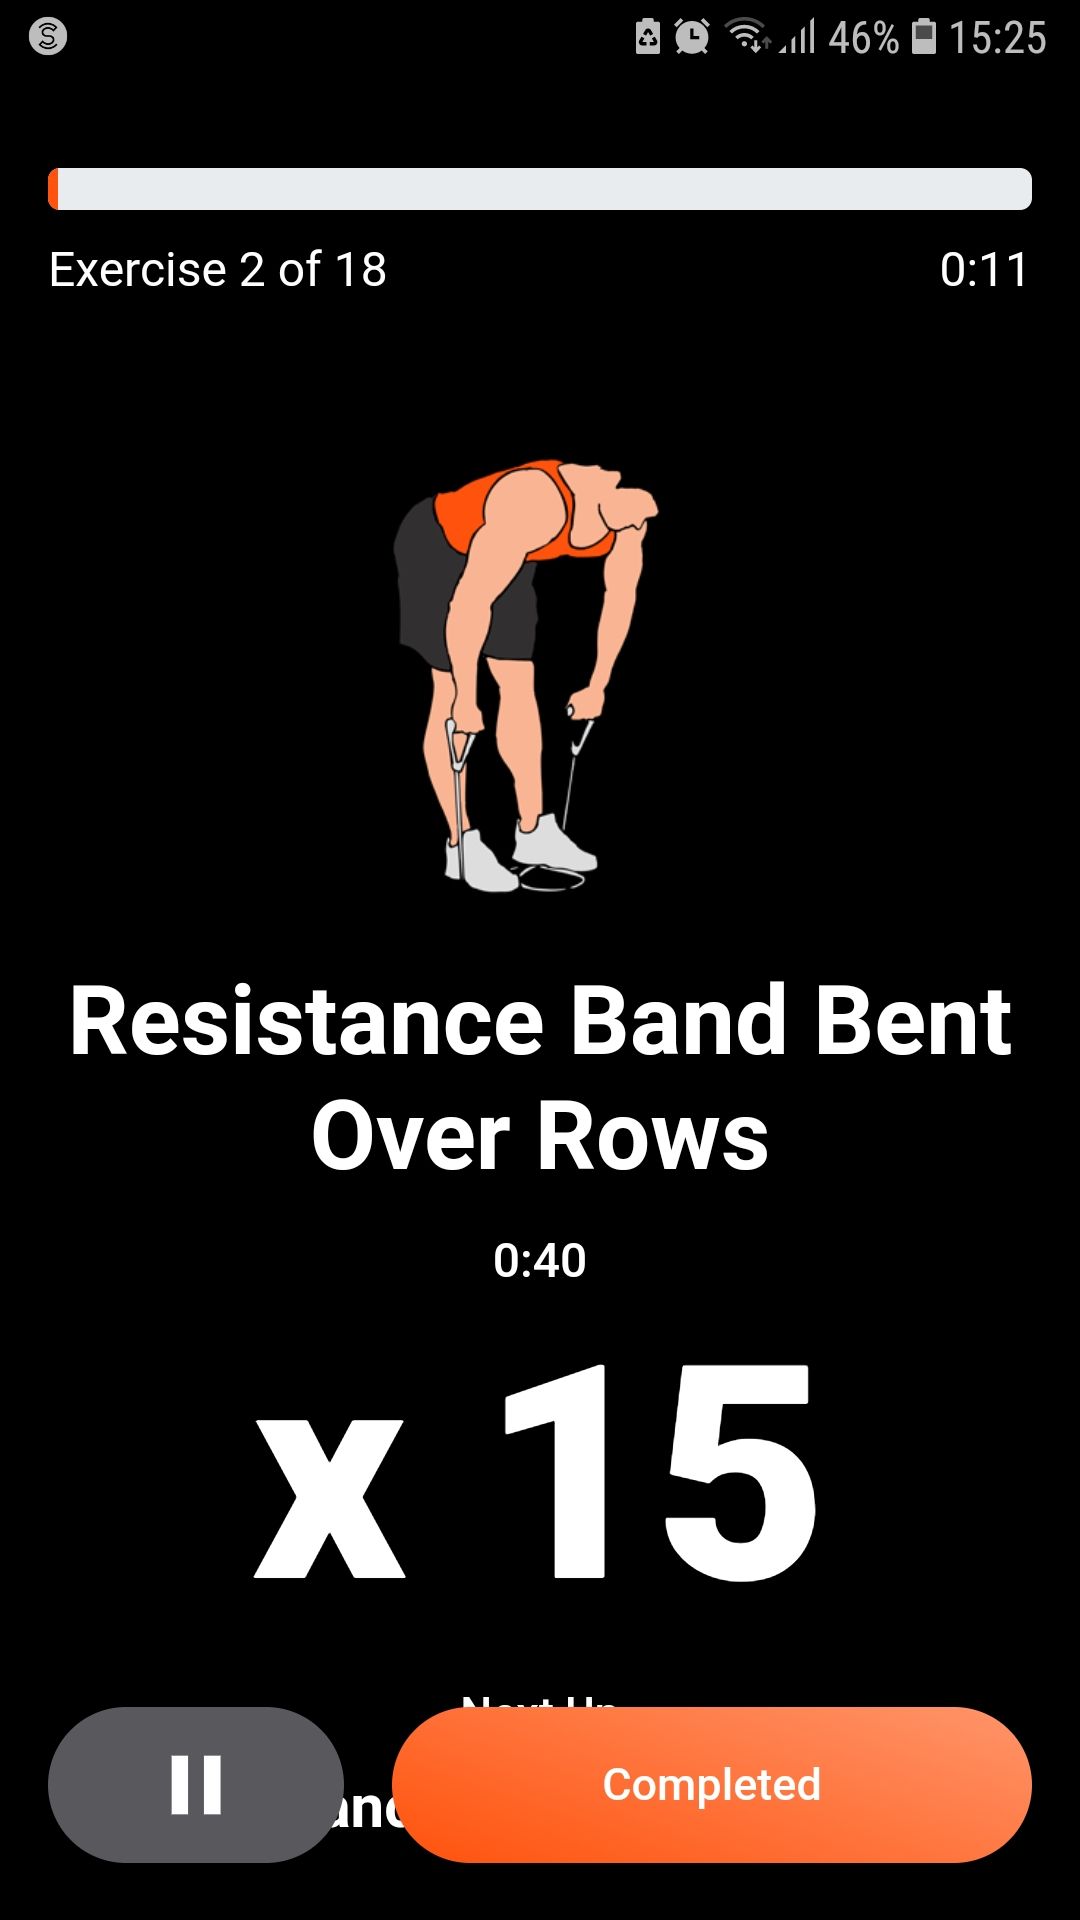 Resistance Band Training mobile workout app